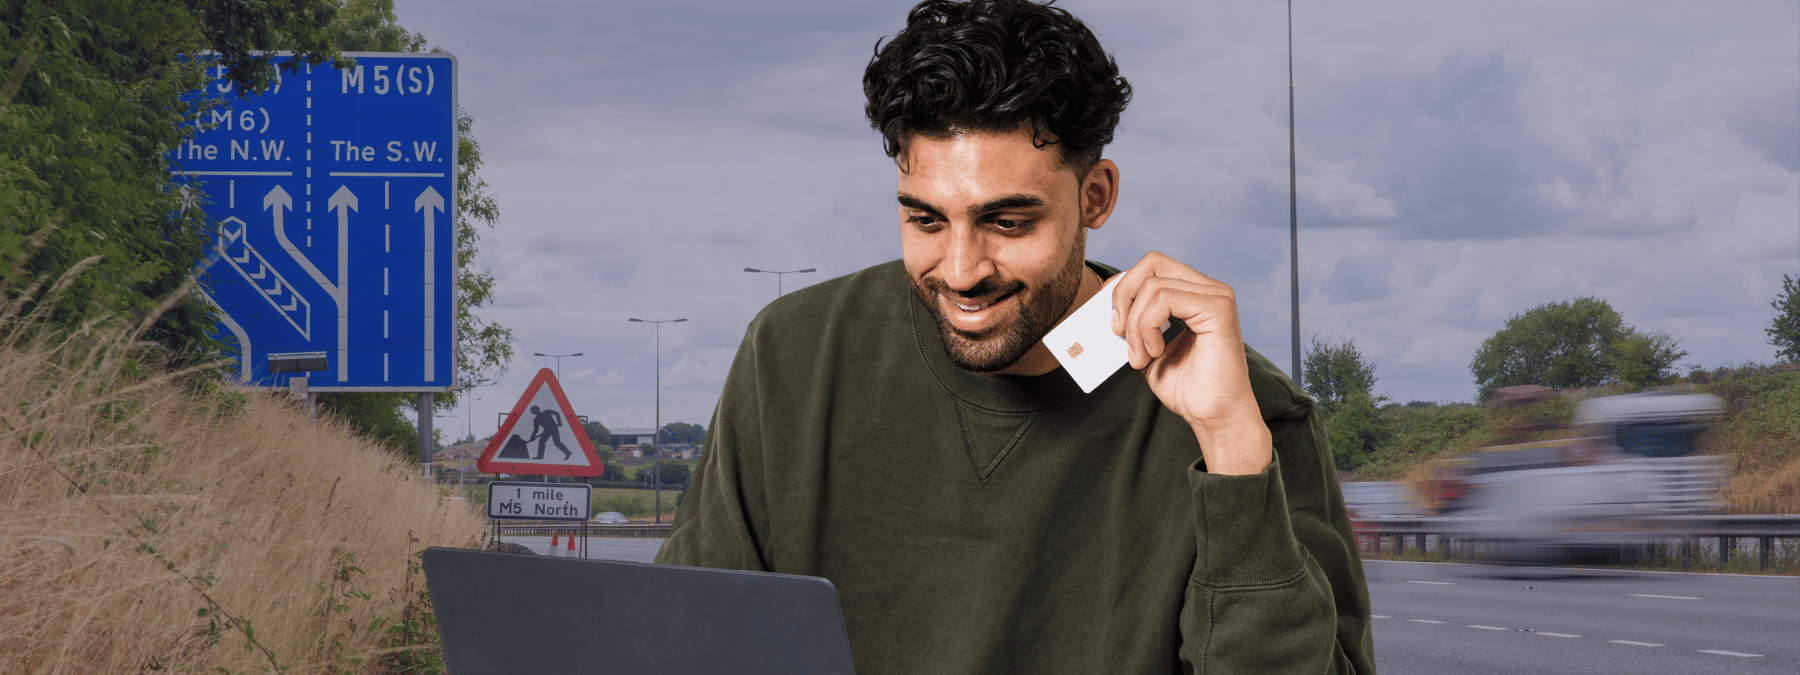 Man on laptop holding a credit card